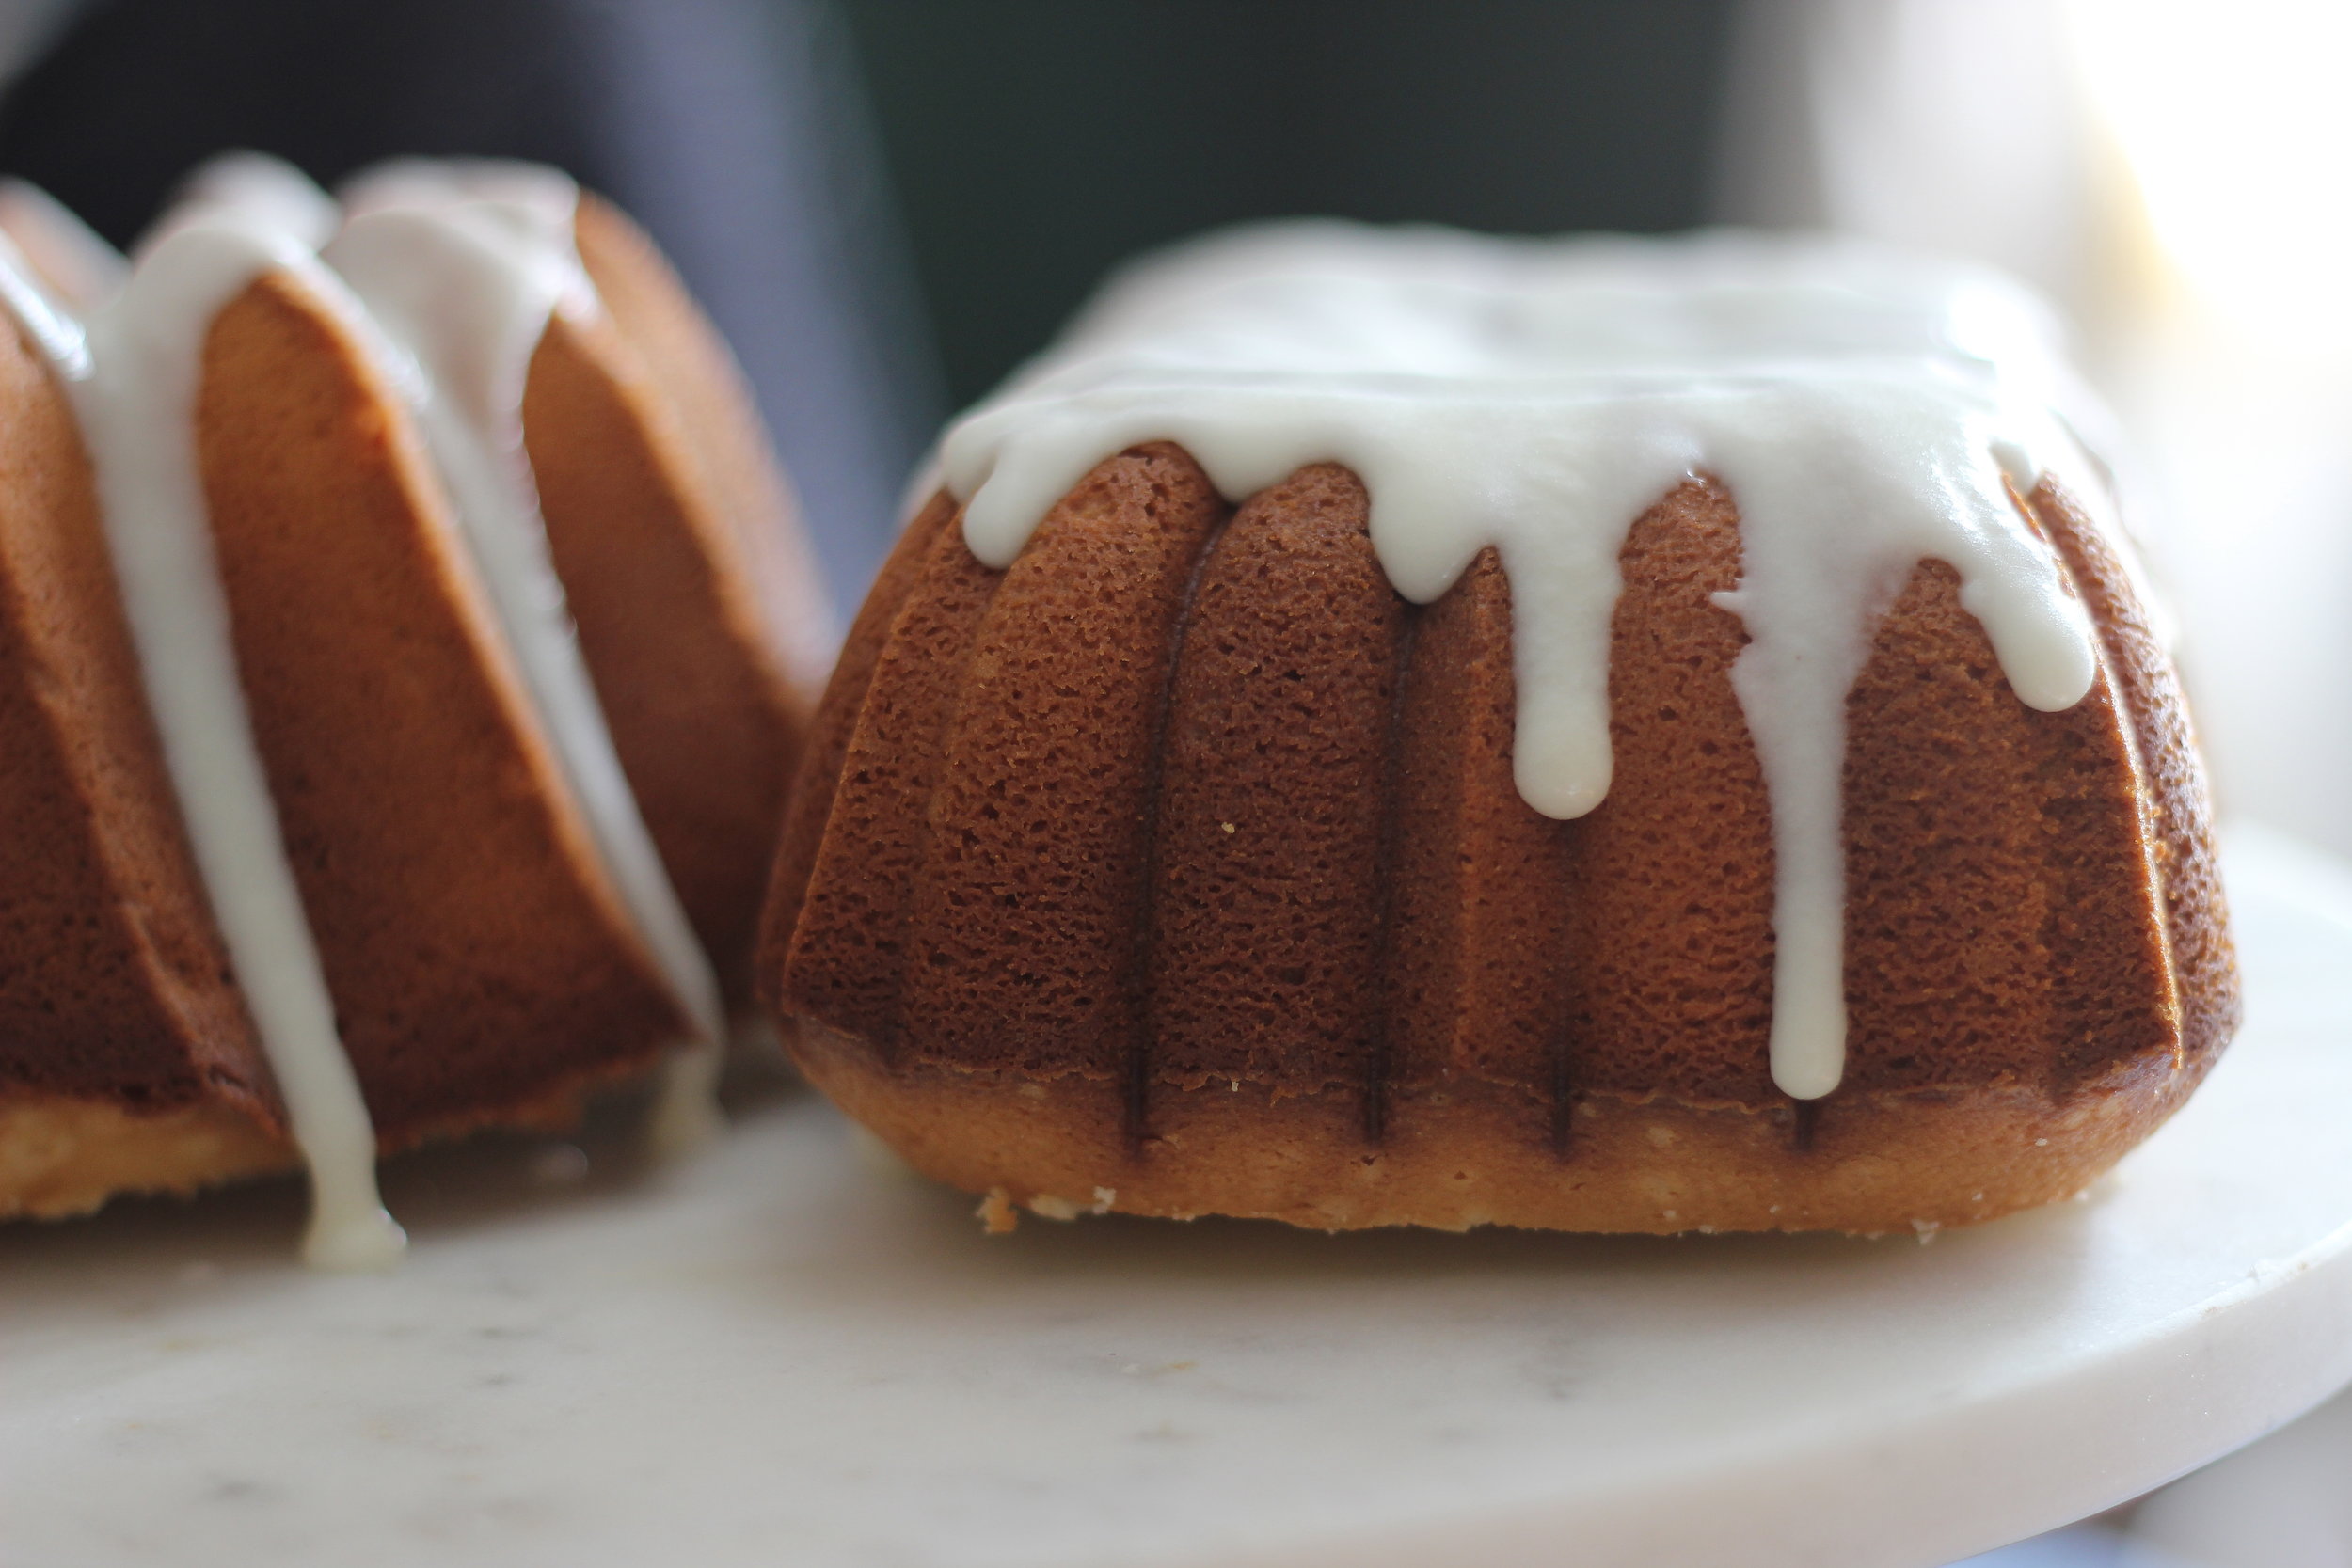 How to Get a Bundt Cake Out of the Pan